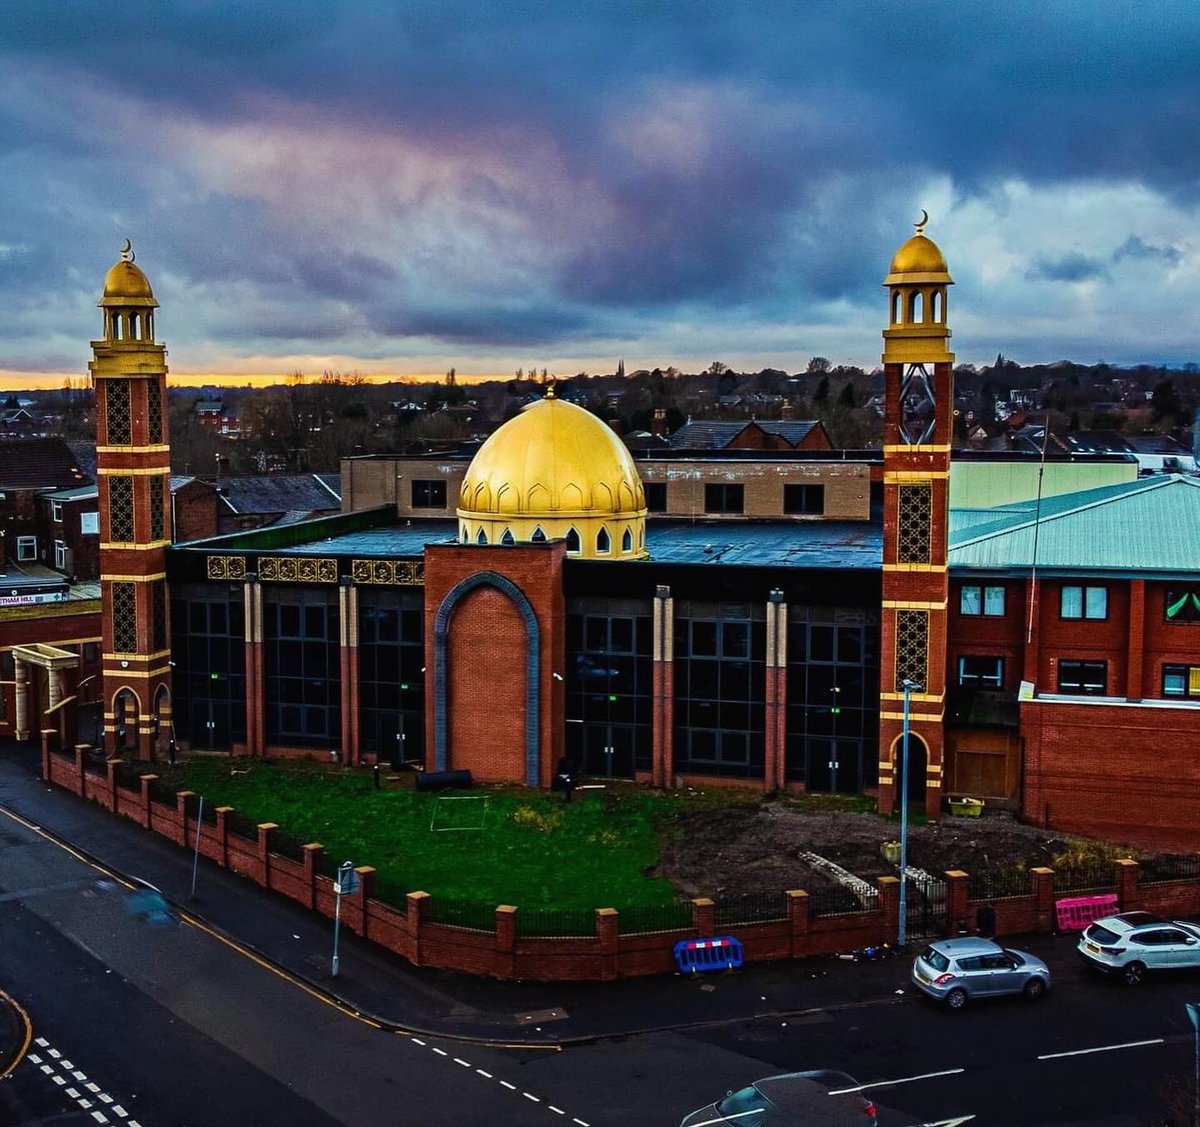 Marvel at the splendid beauty of our Masjid Anwaar ul Haramain, in North Manchester. 

Photography by: Fly or Die - Aerial Photography

#cityskyline #bigcitylife #manchester #mcr #mcruk #thisismanchester #manchesterdrone #manchesterphoto #manchestersunset #manchesterskyline